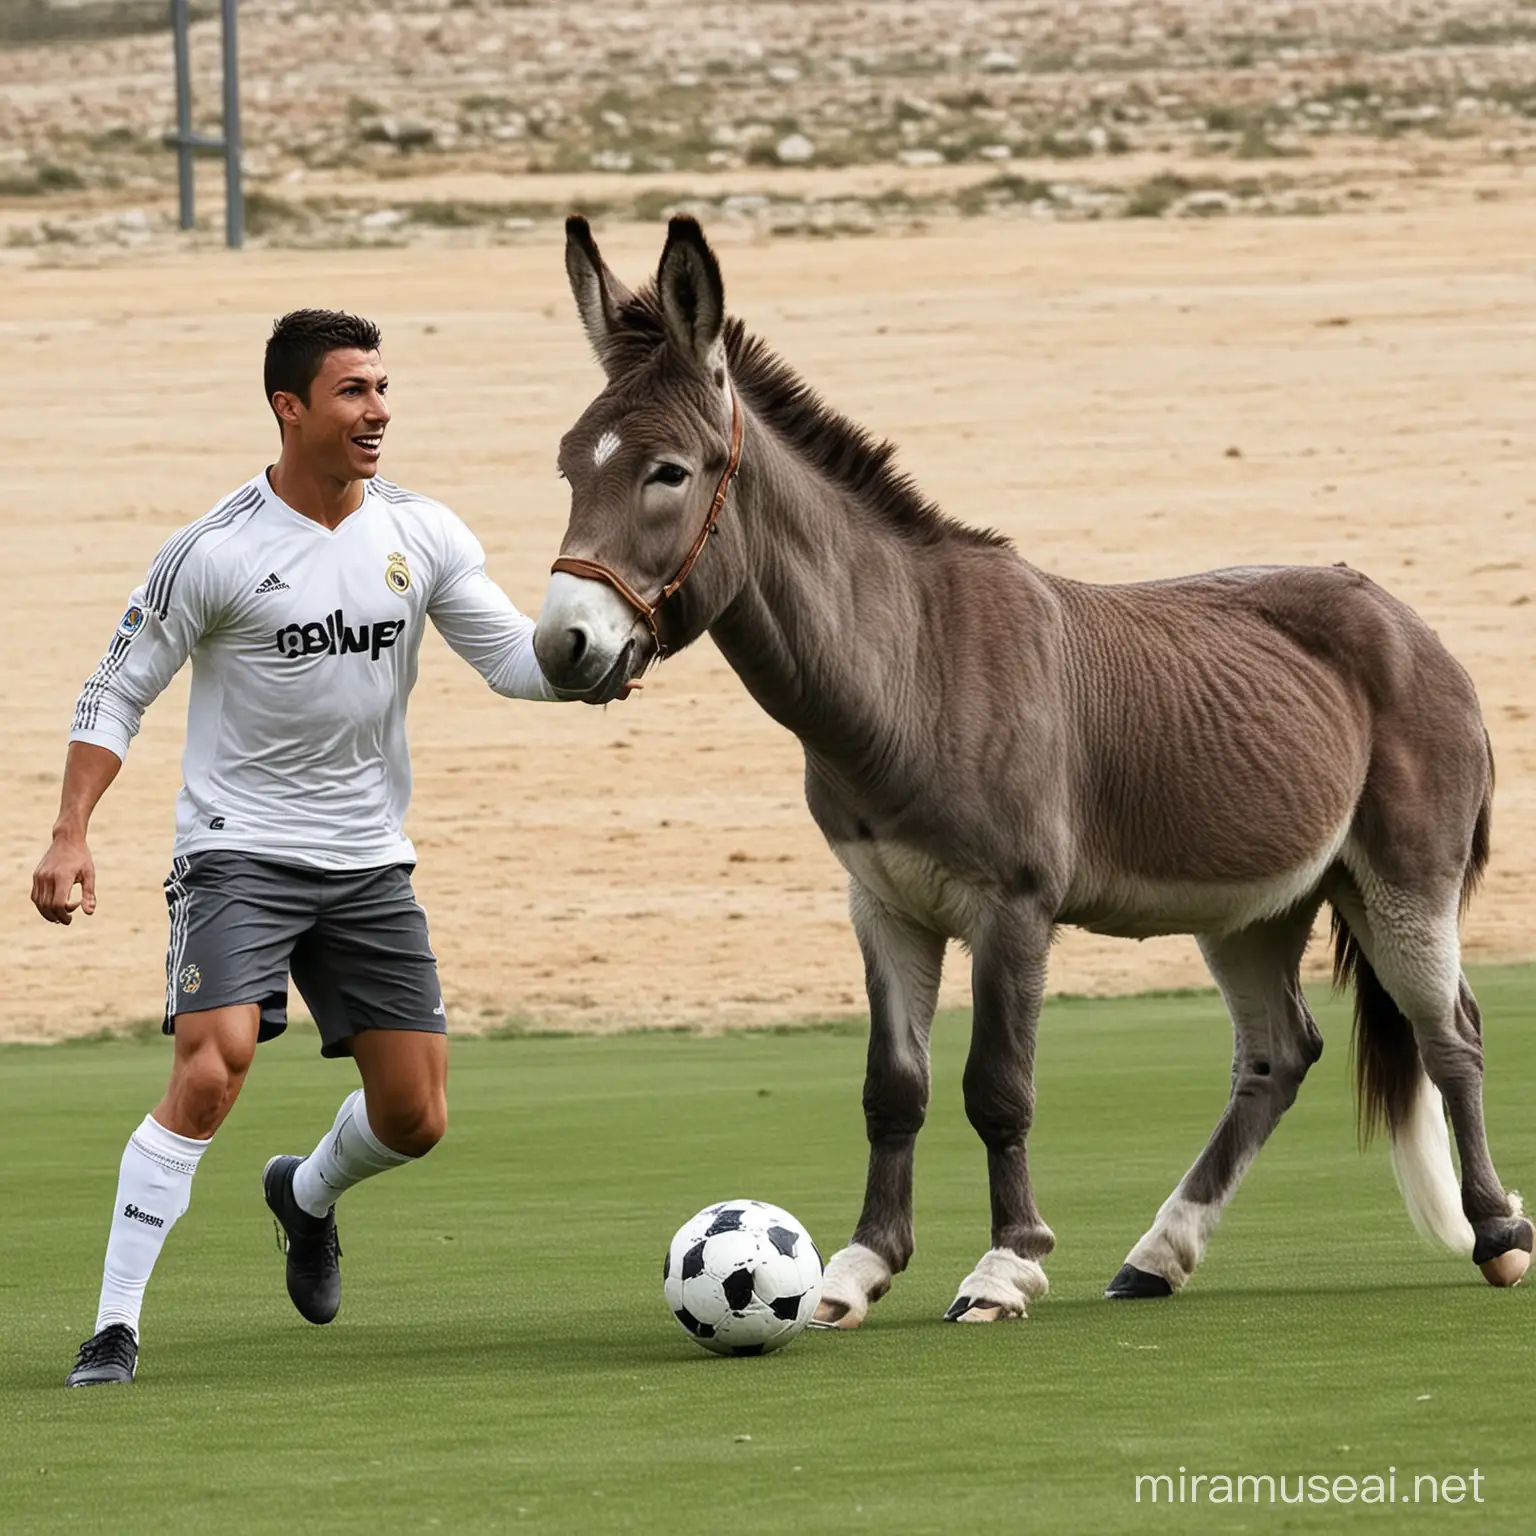 Donkey Playing Football with Cristiano Ronaldo Fun Animal Athlete meets Soccer Superstar